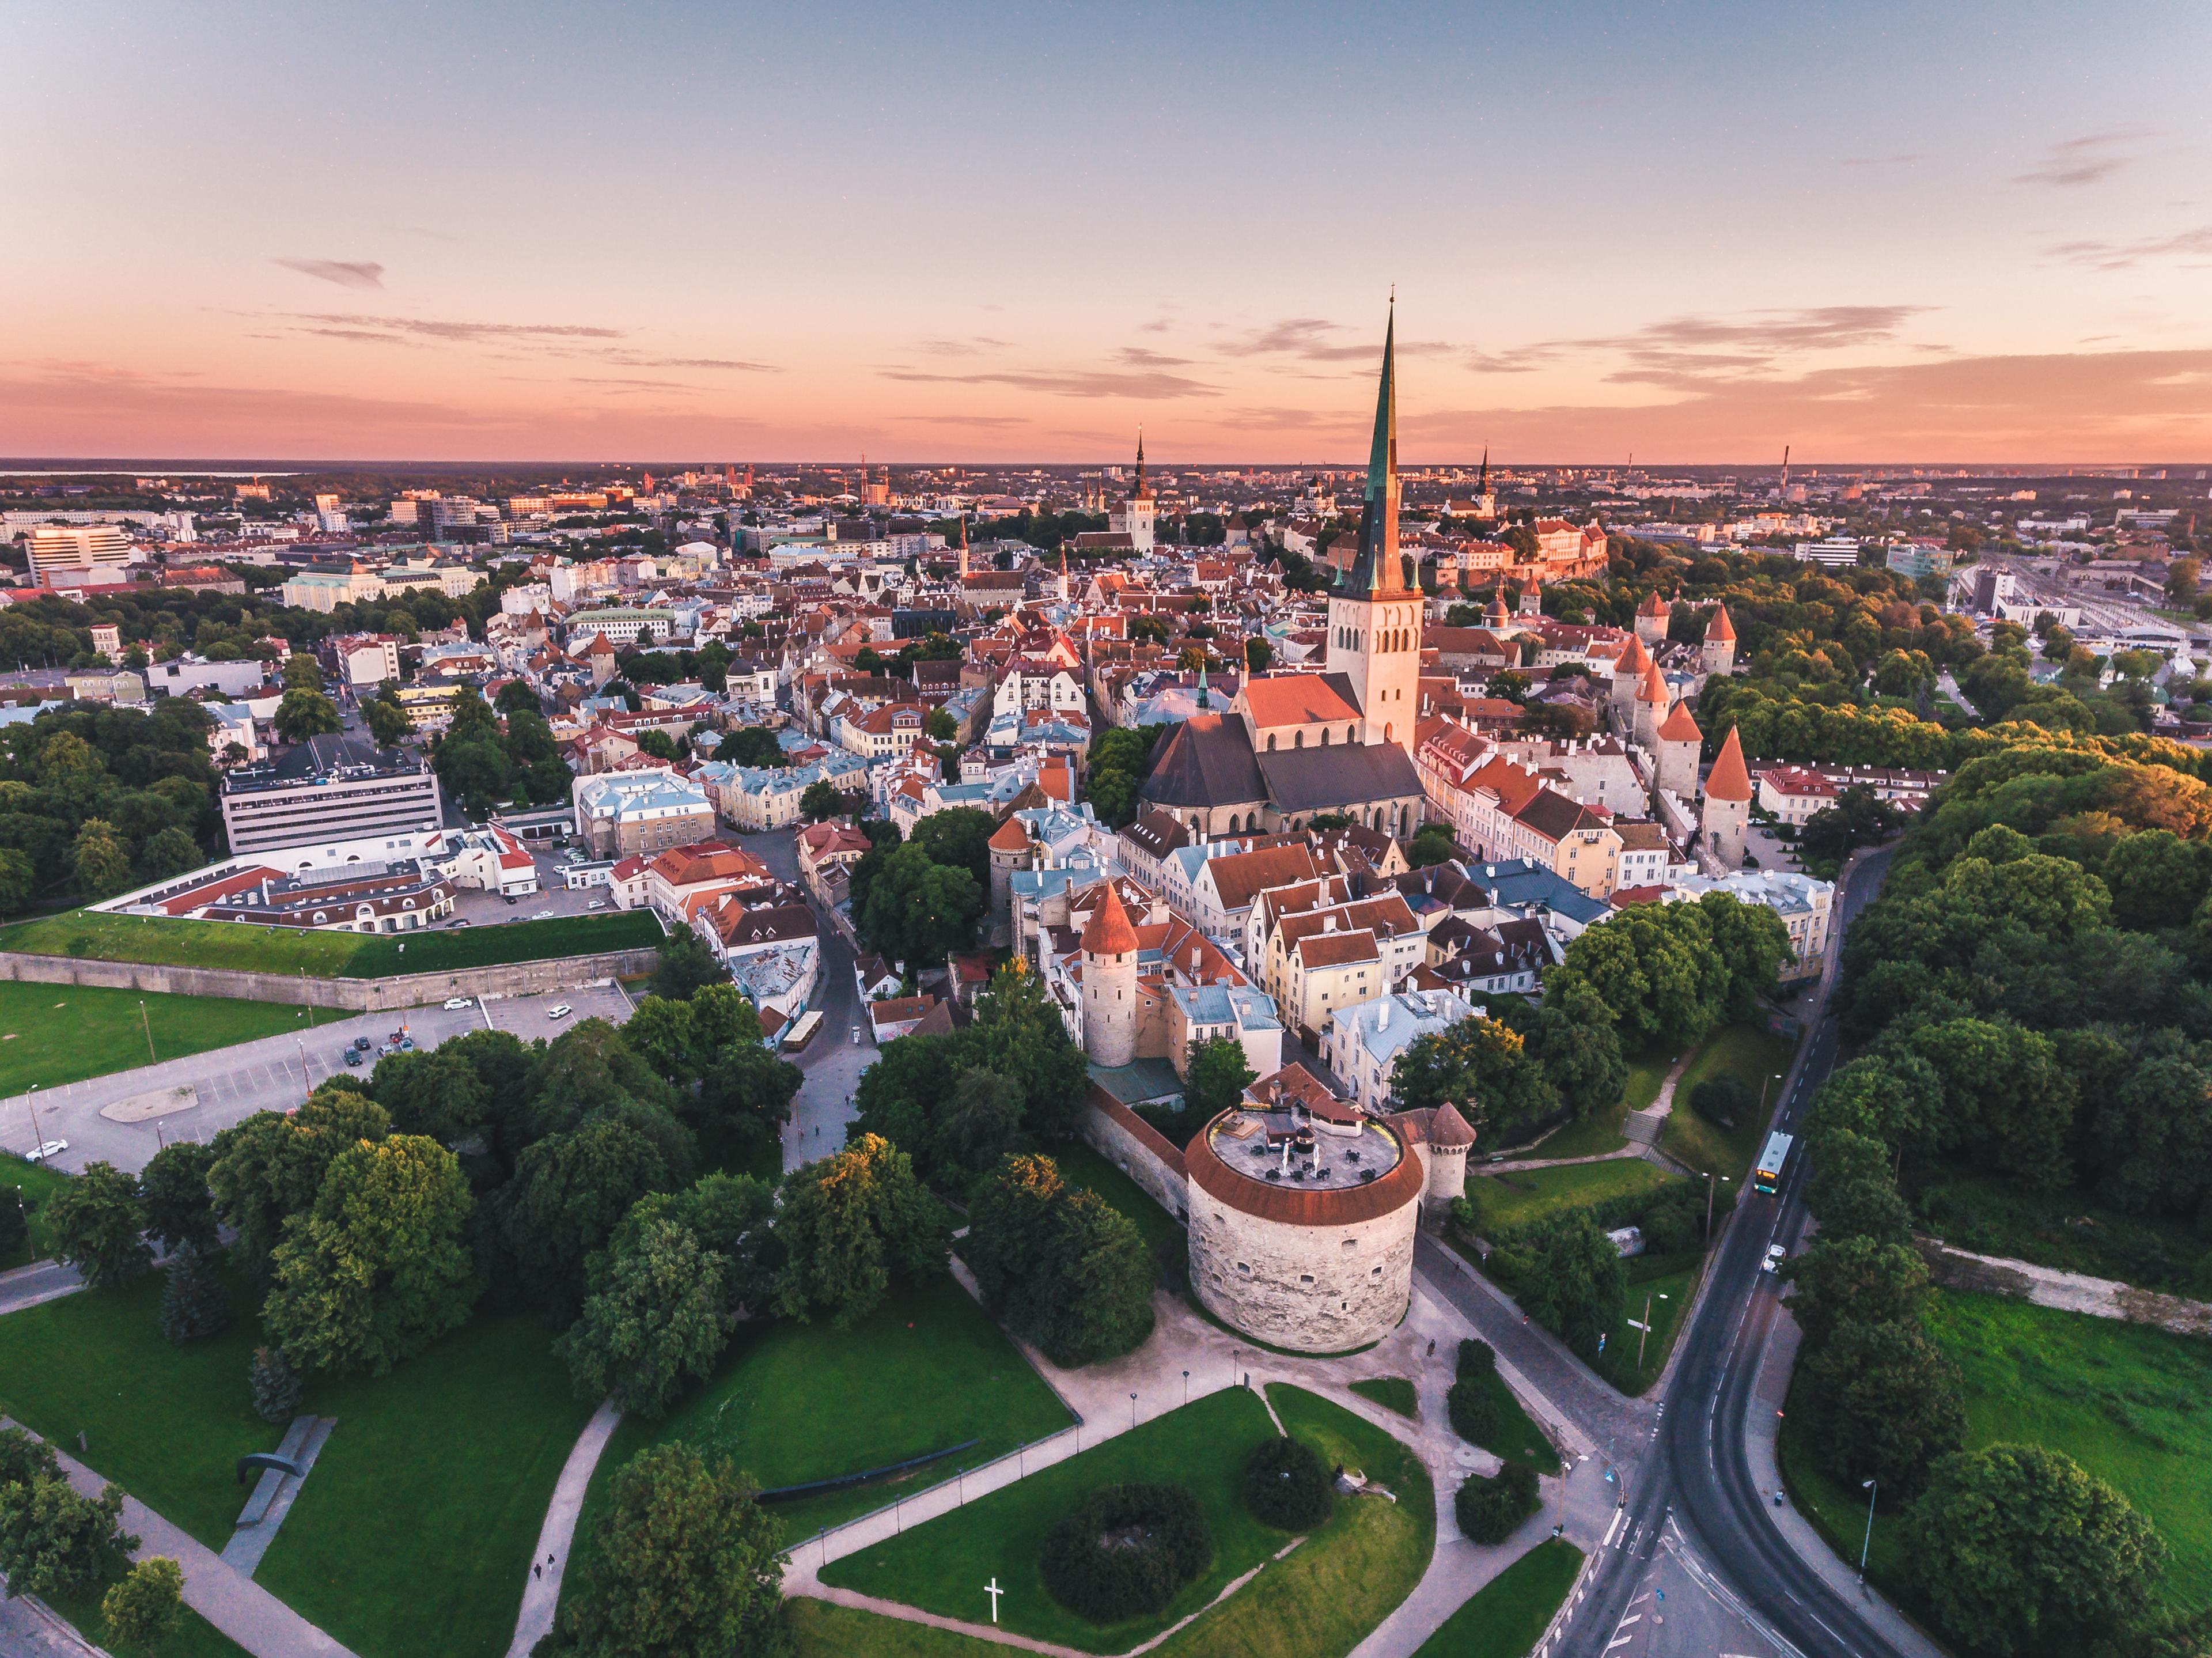 Picture of the city of Tallinn